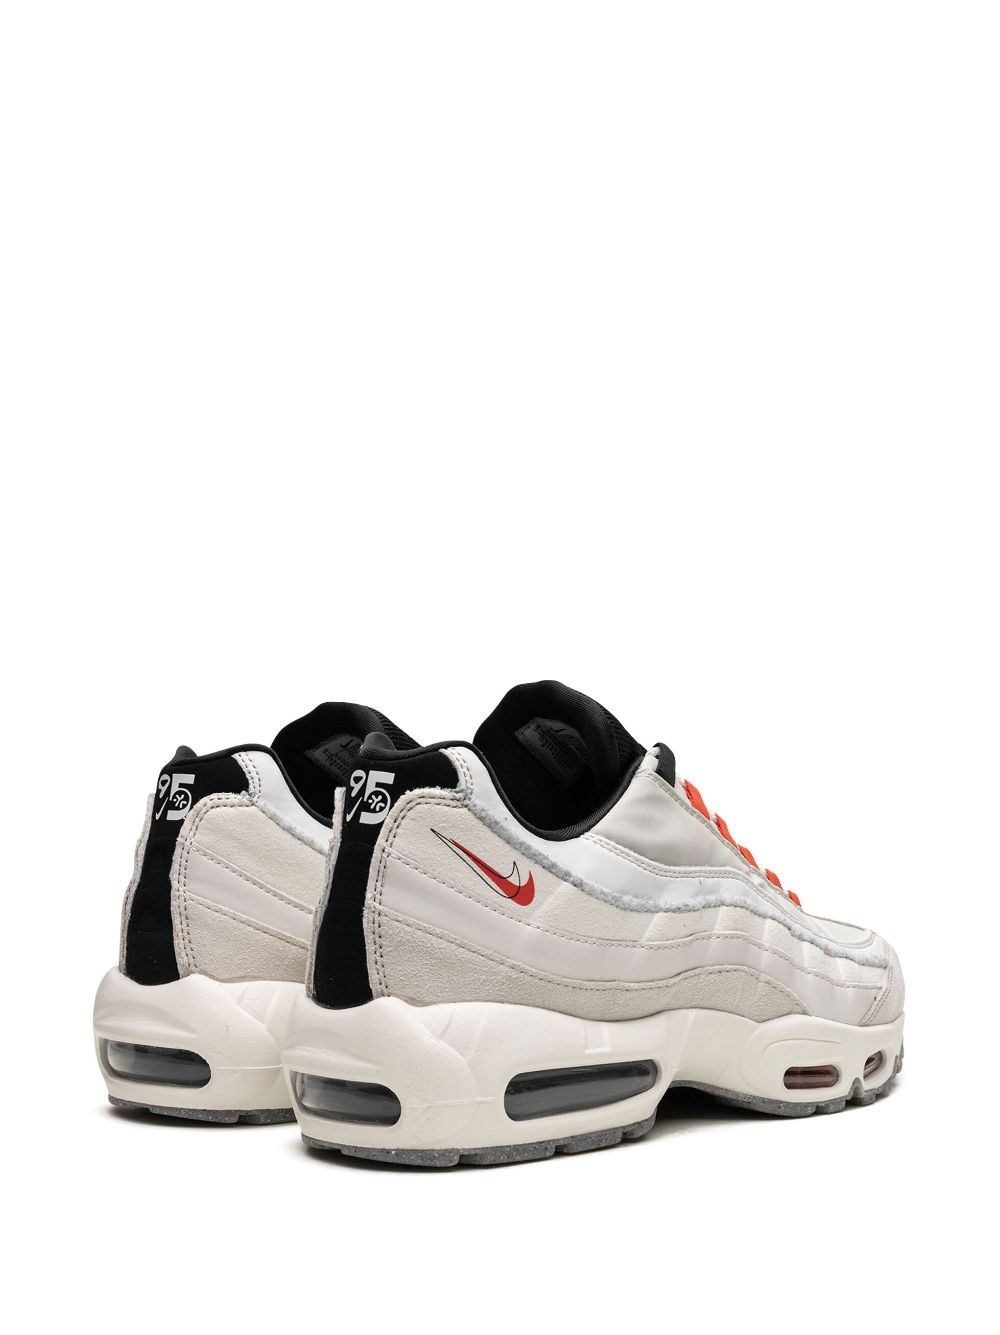 Air Max 95 SE "Double Swoosh" sneakers - 3